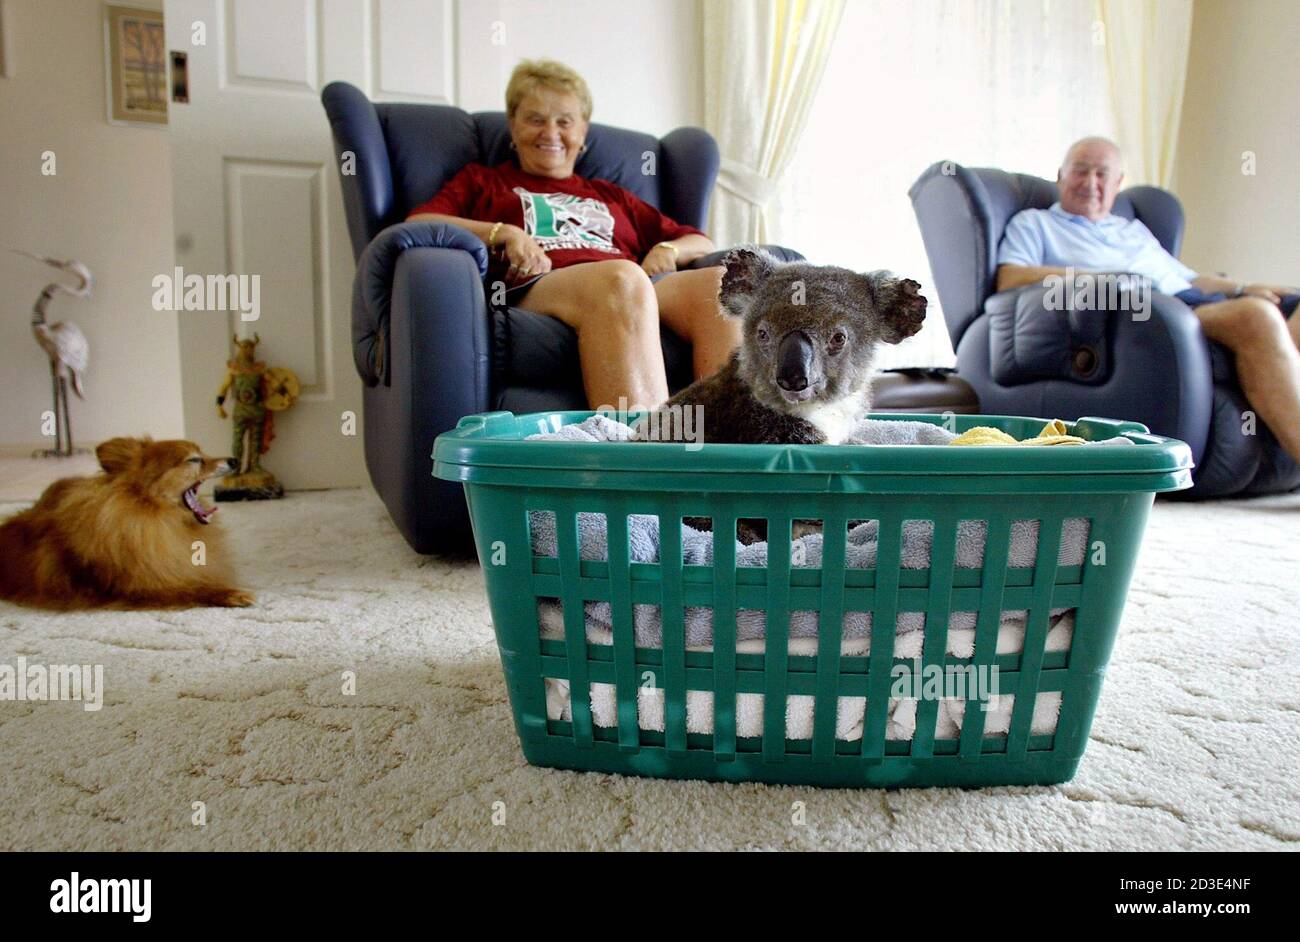 Barbara Barrett (C) and her husband Ron watch over a koala named 'Perch  Miracle' while their dog Tara yawns in the living room of their Port  Macquarie home, about 300 km (186